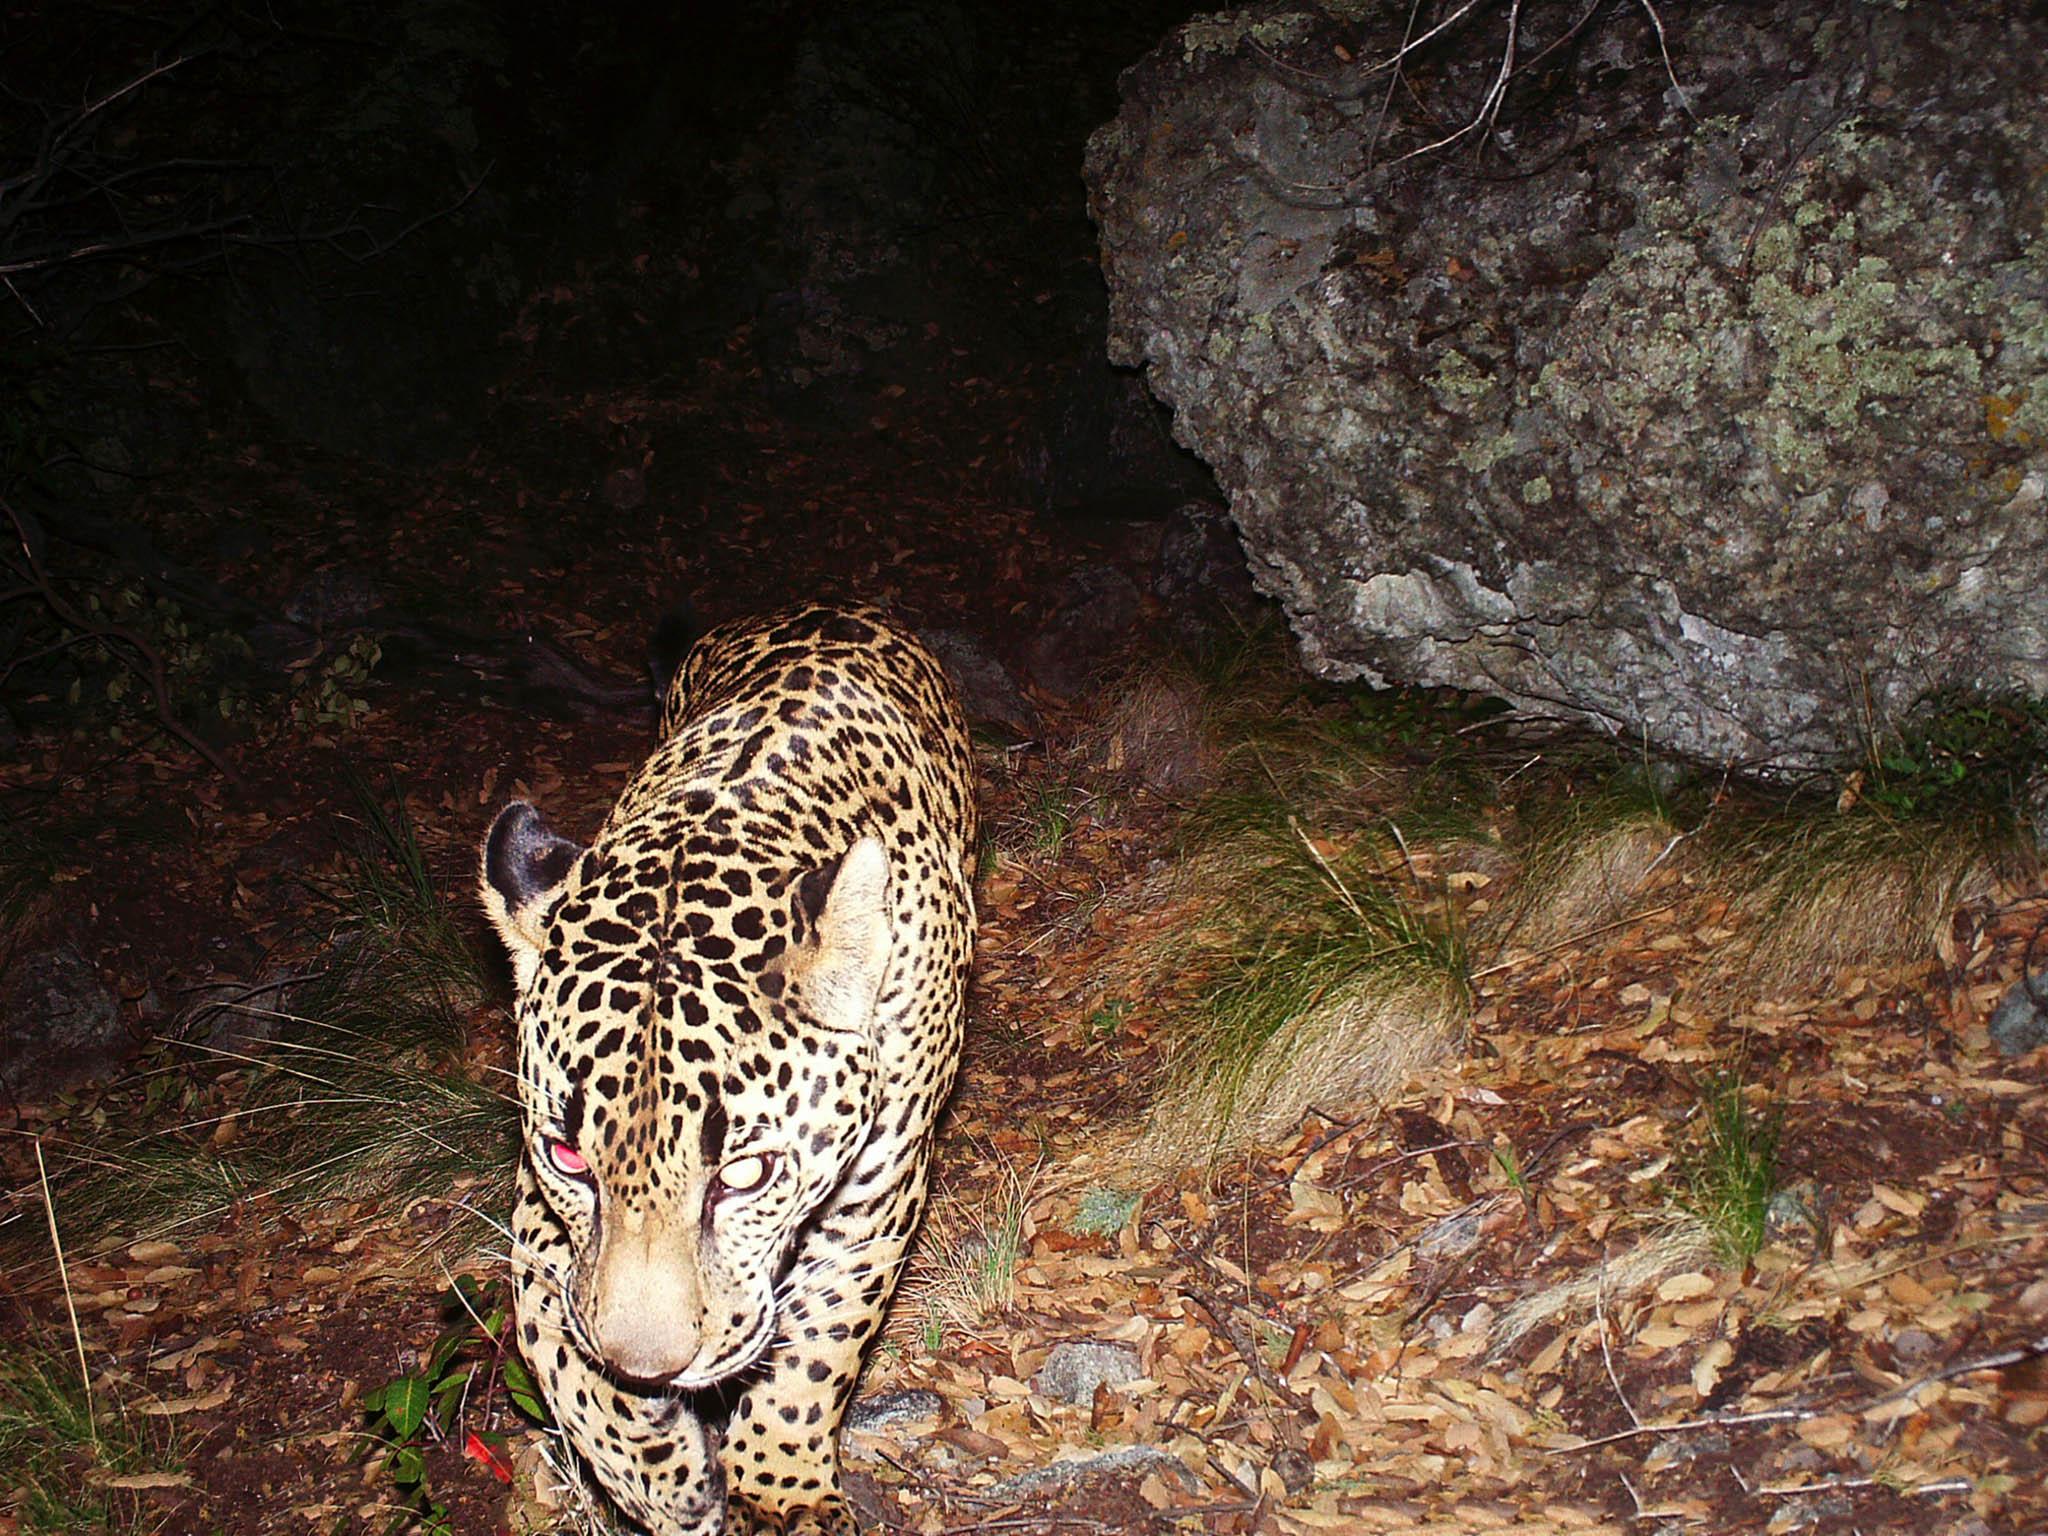 All manner of wildlife make forays across the Mexican border, including El Jefe, the only known wild jaguar in the US